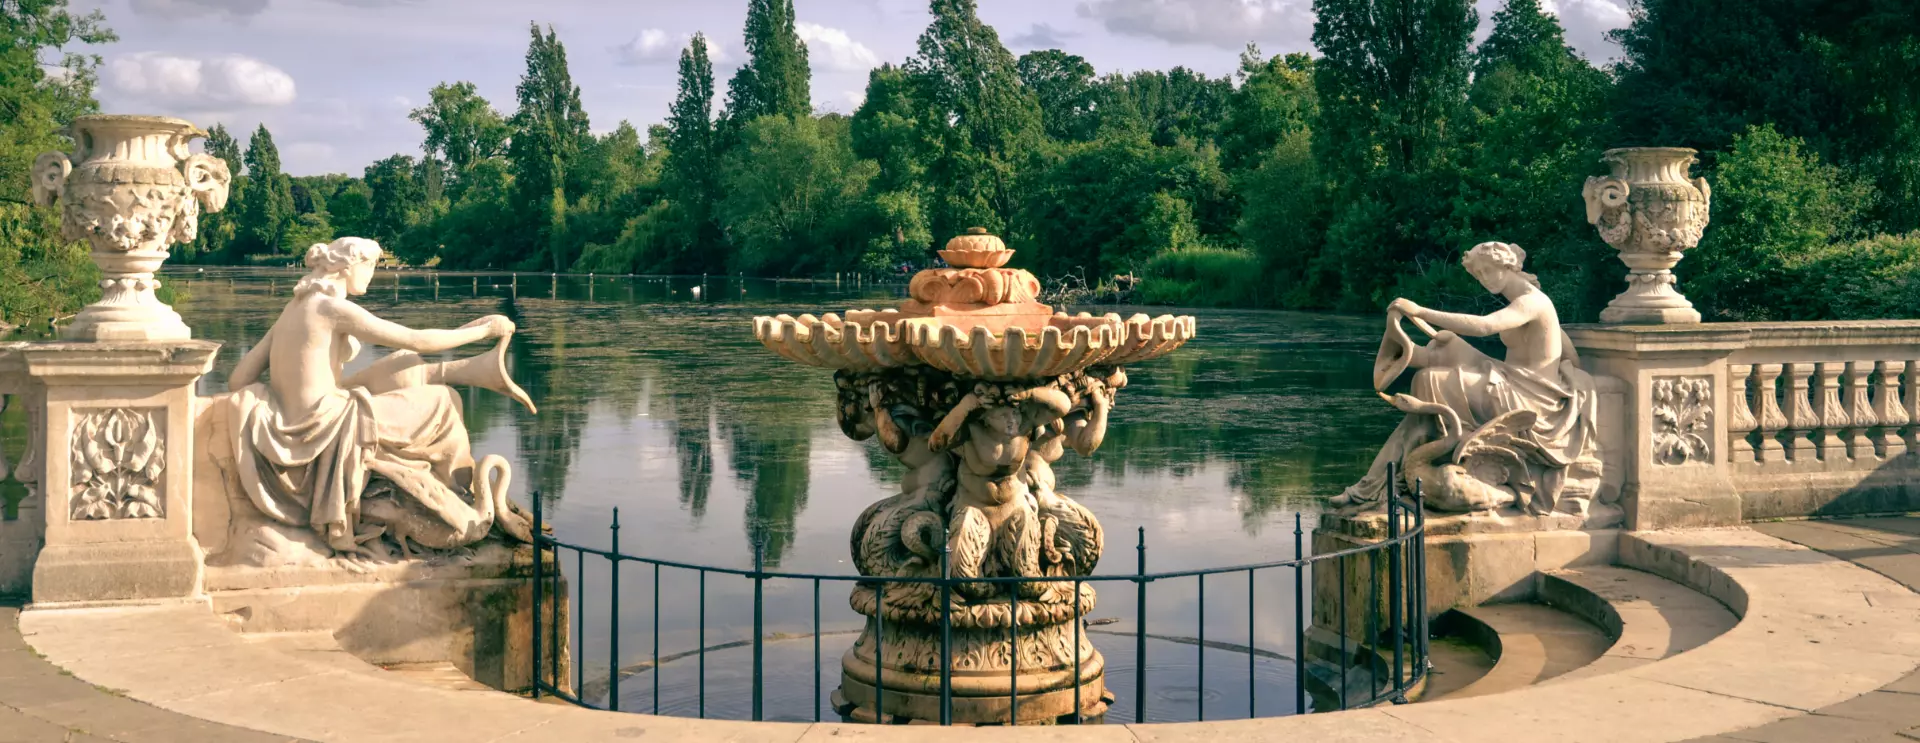 Ornate fountain on a lake surrounded by white stone sculptures and lush green trees